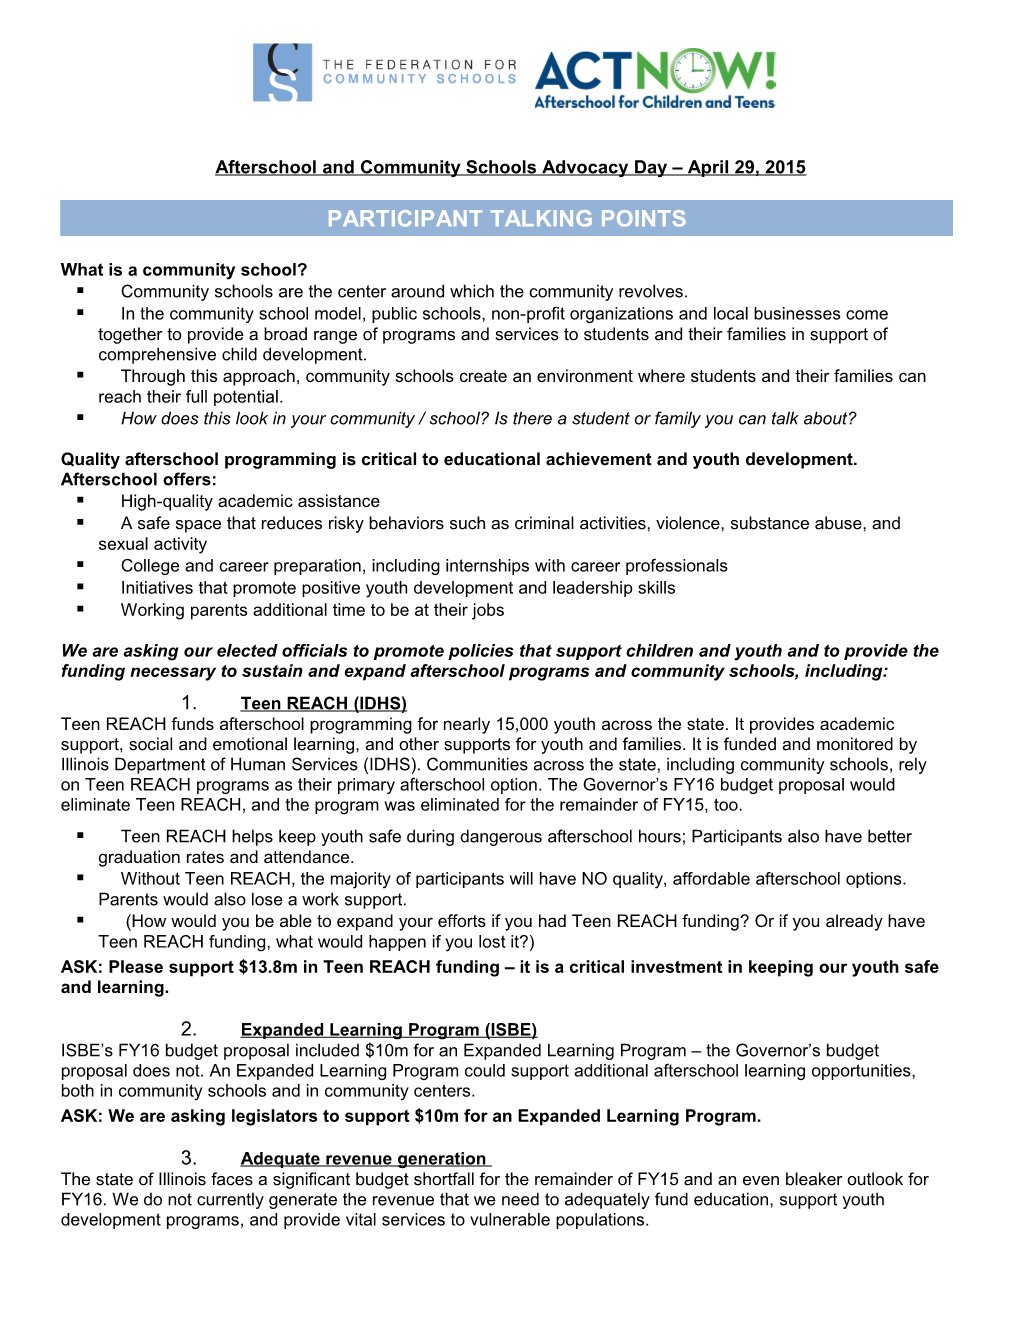 Afterschool and Community Schools Advocacy Day April 29, 2015